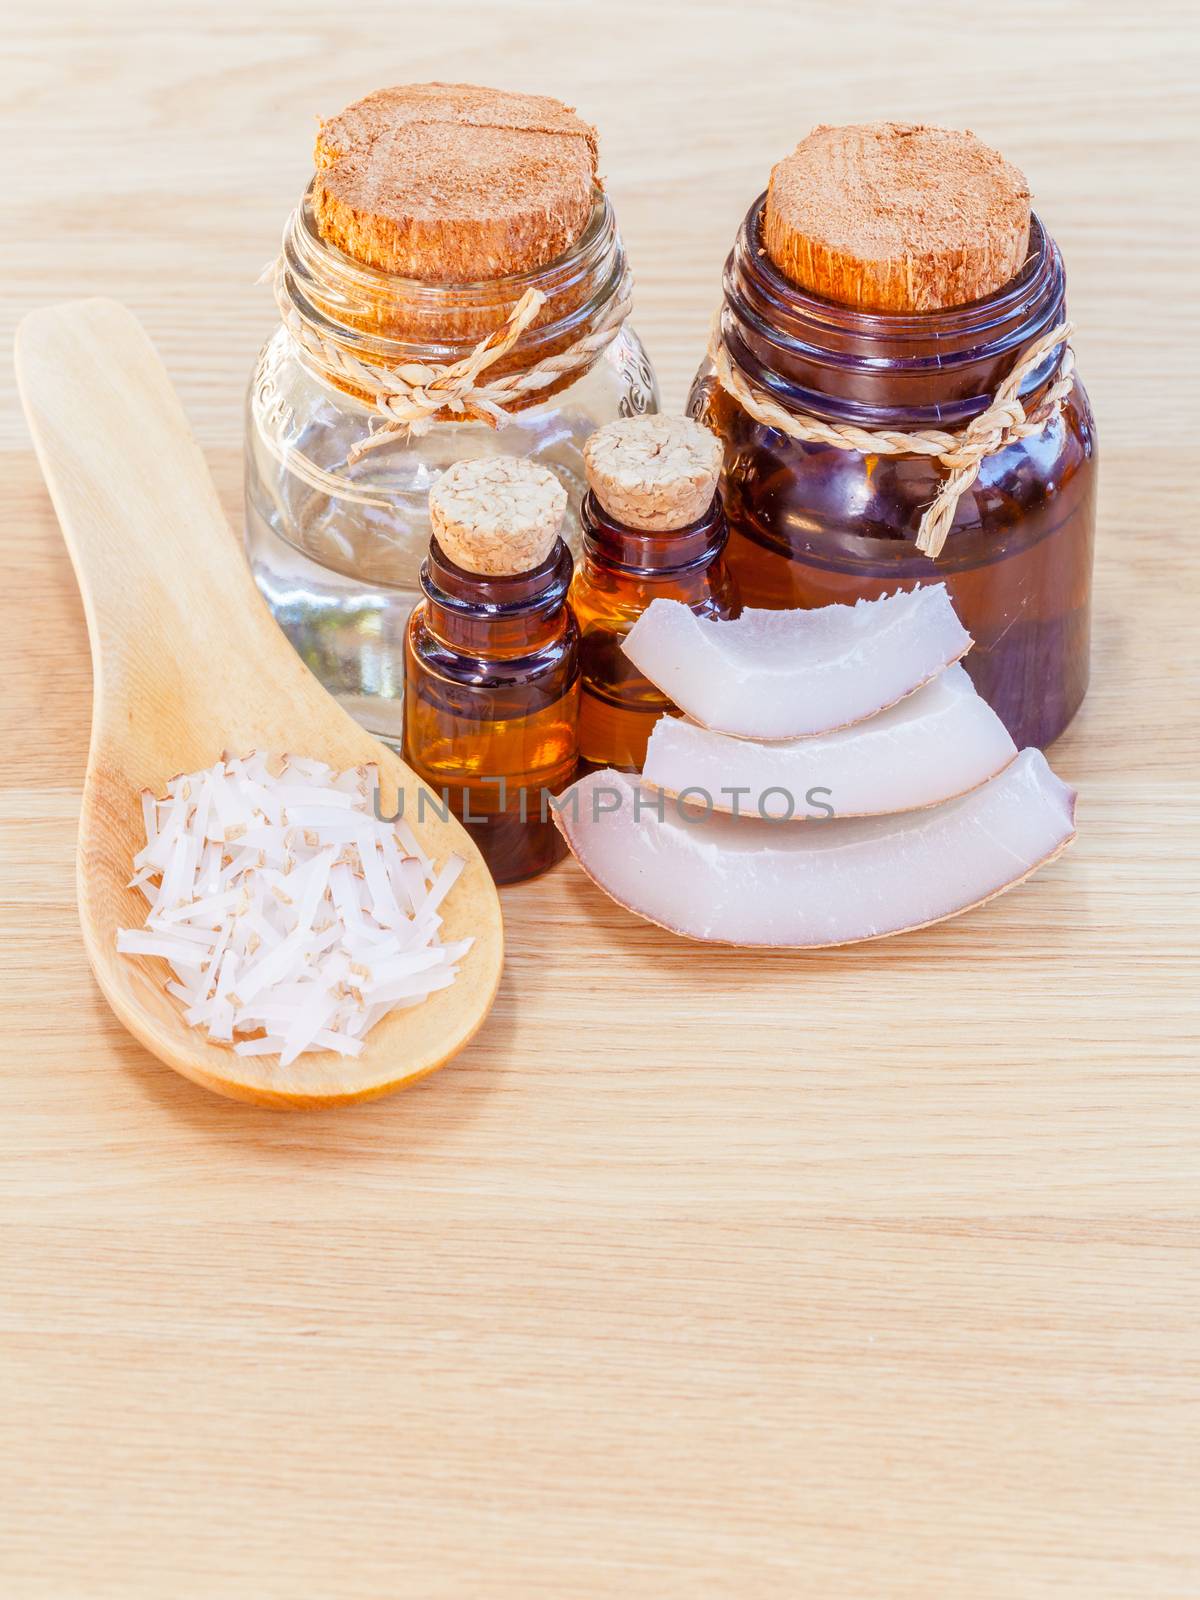 Natural Spa Ingredients . - Coconut essential Oil for alternative therapy.